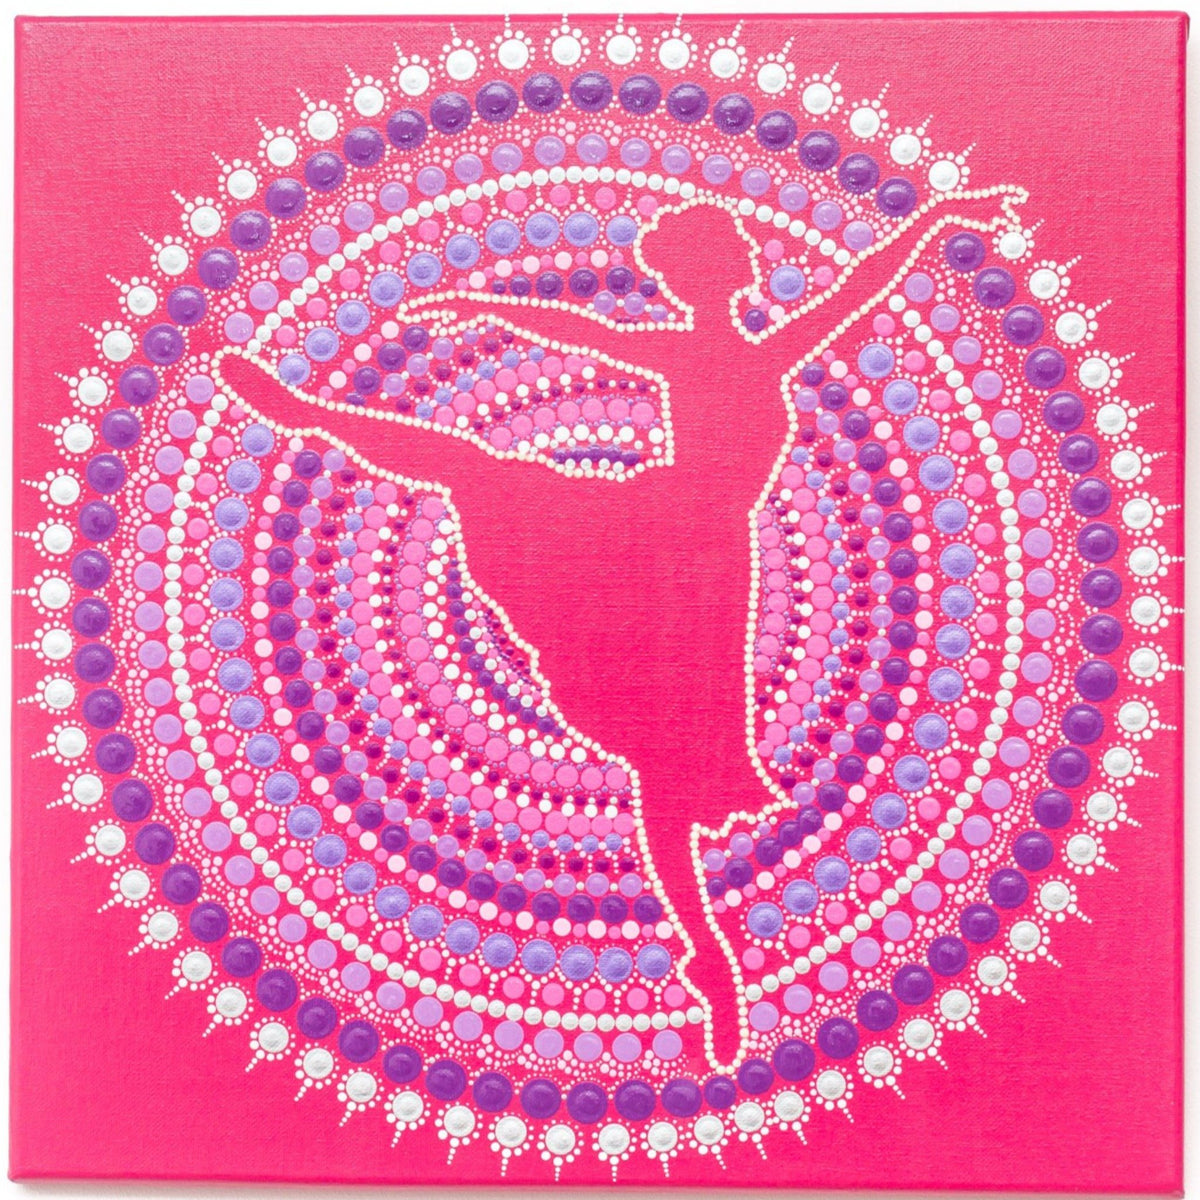 Ballerina dot painting  pink purple white silver dot painting – MandaLove  by Nelly